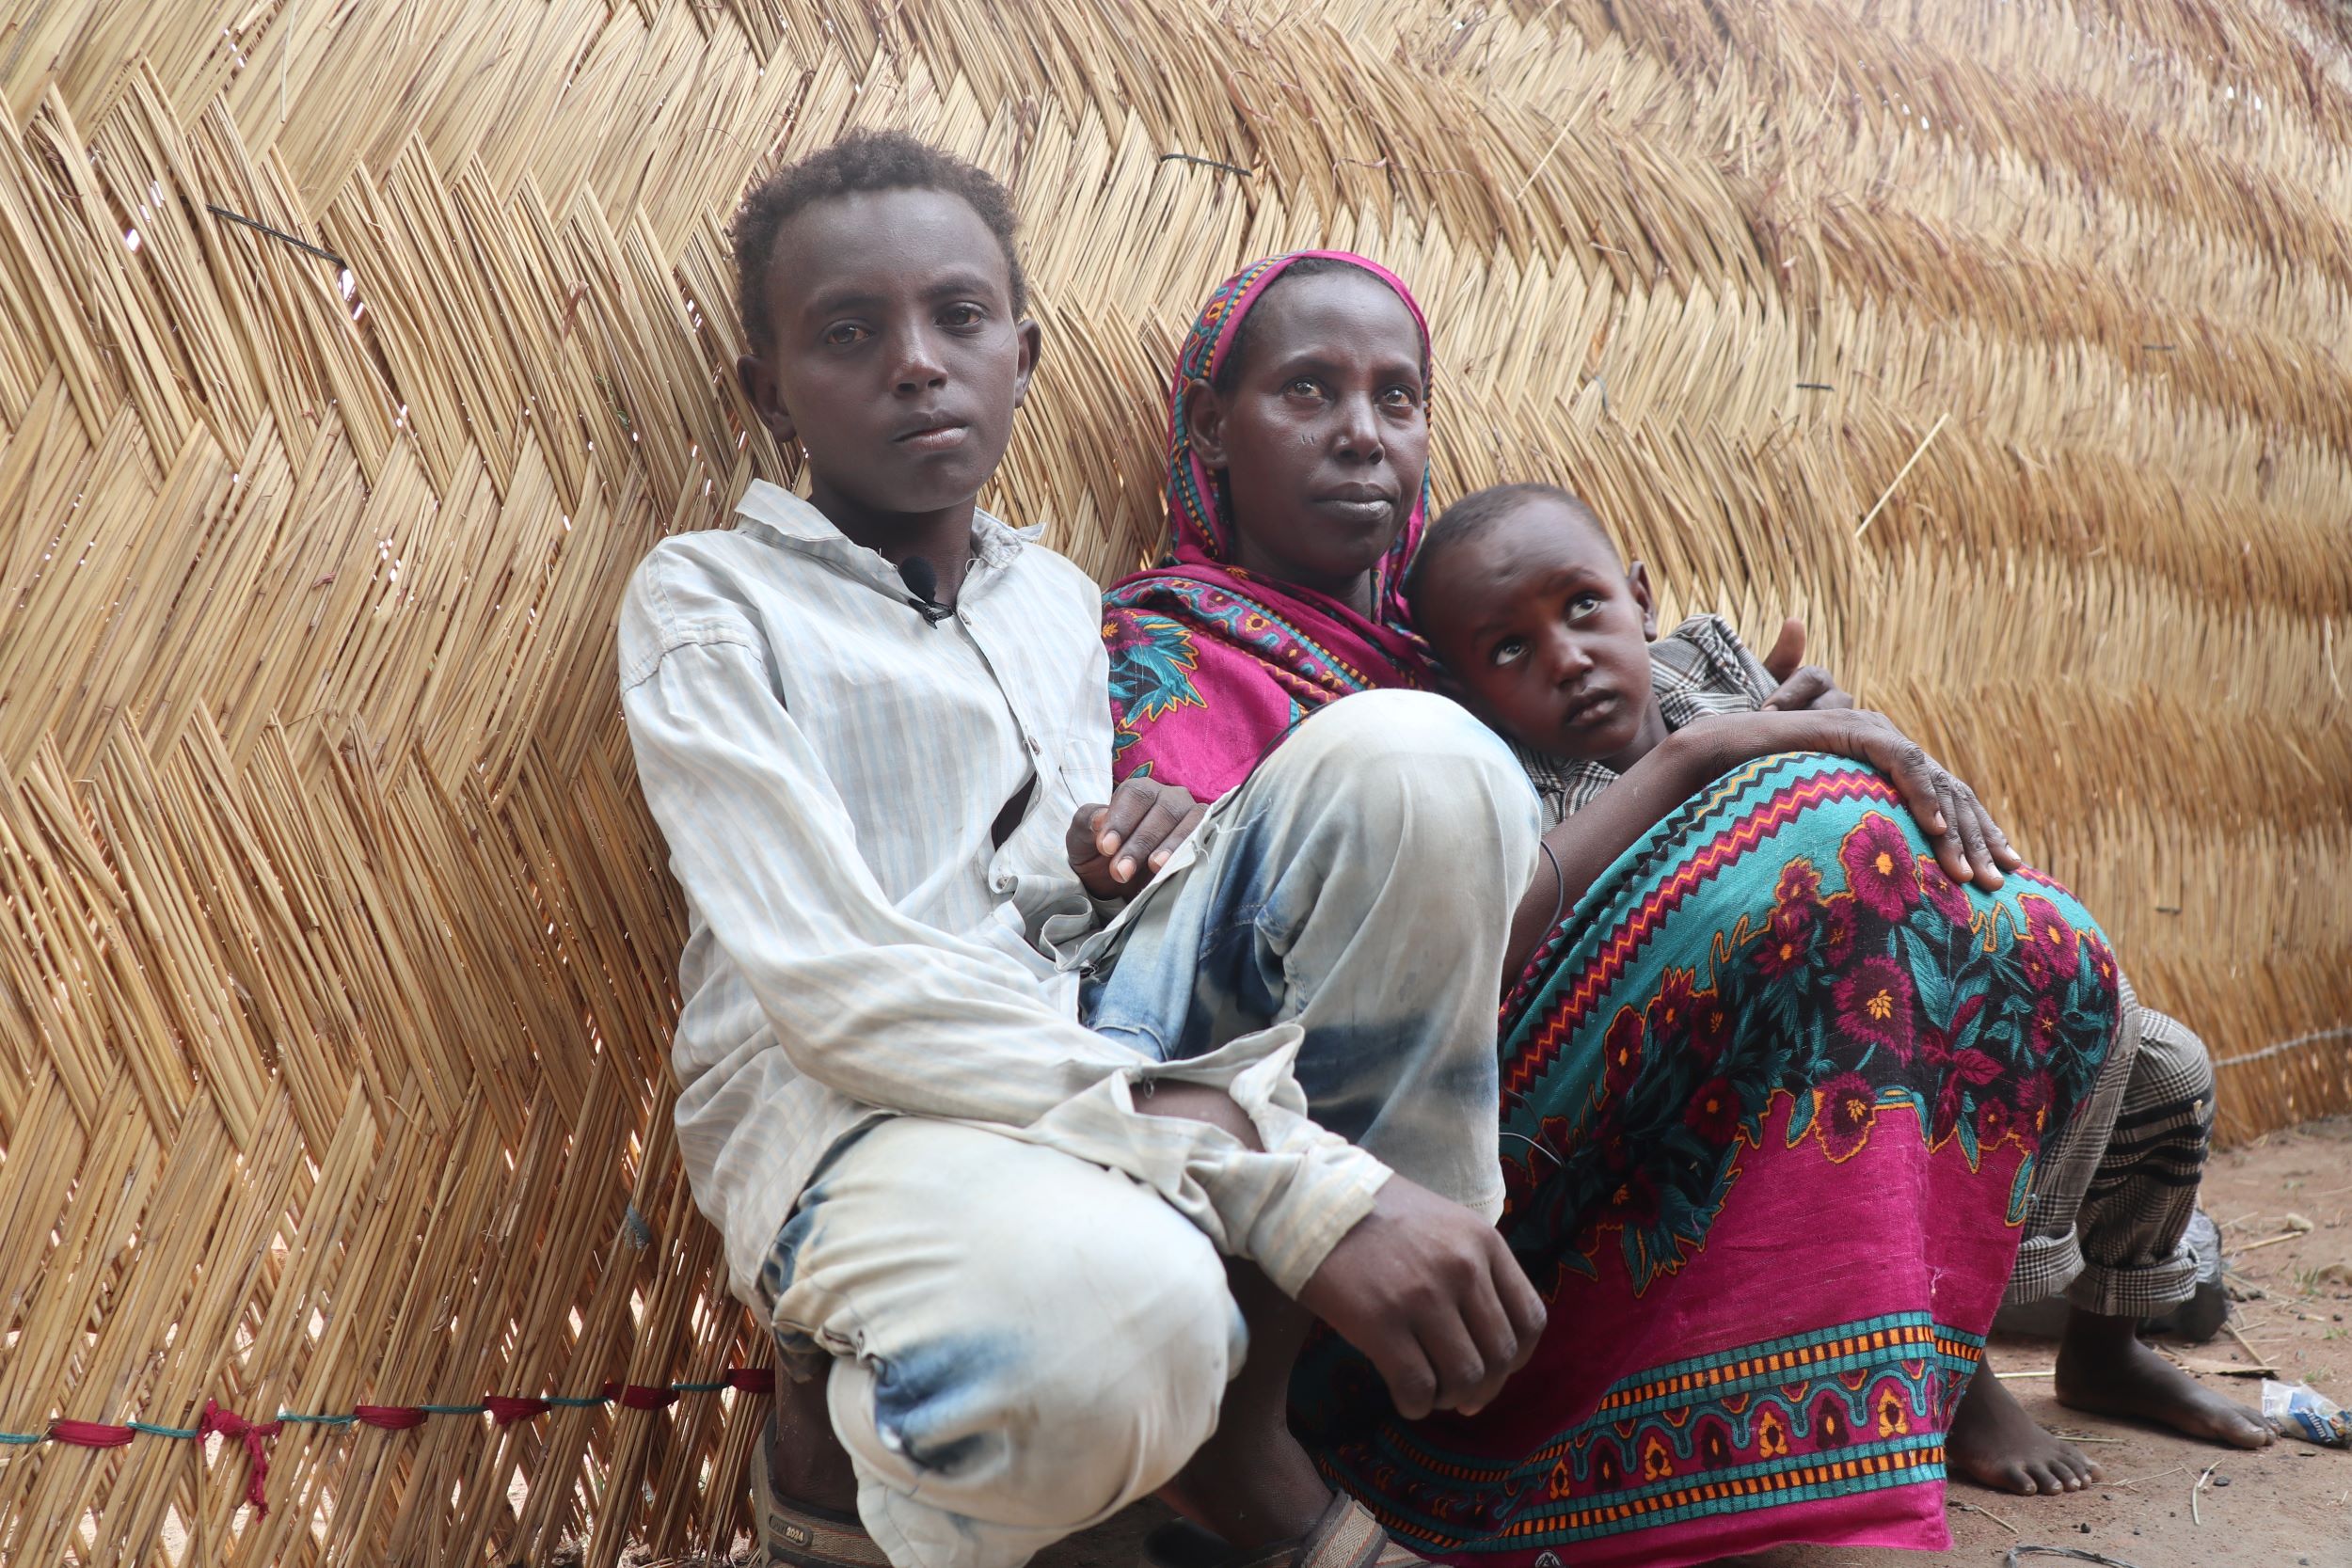 A refugee boy sits with his mum and sibling outside against the woven wall of their shelter, South Sudan